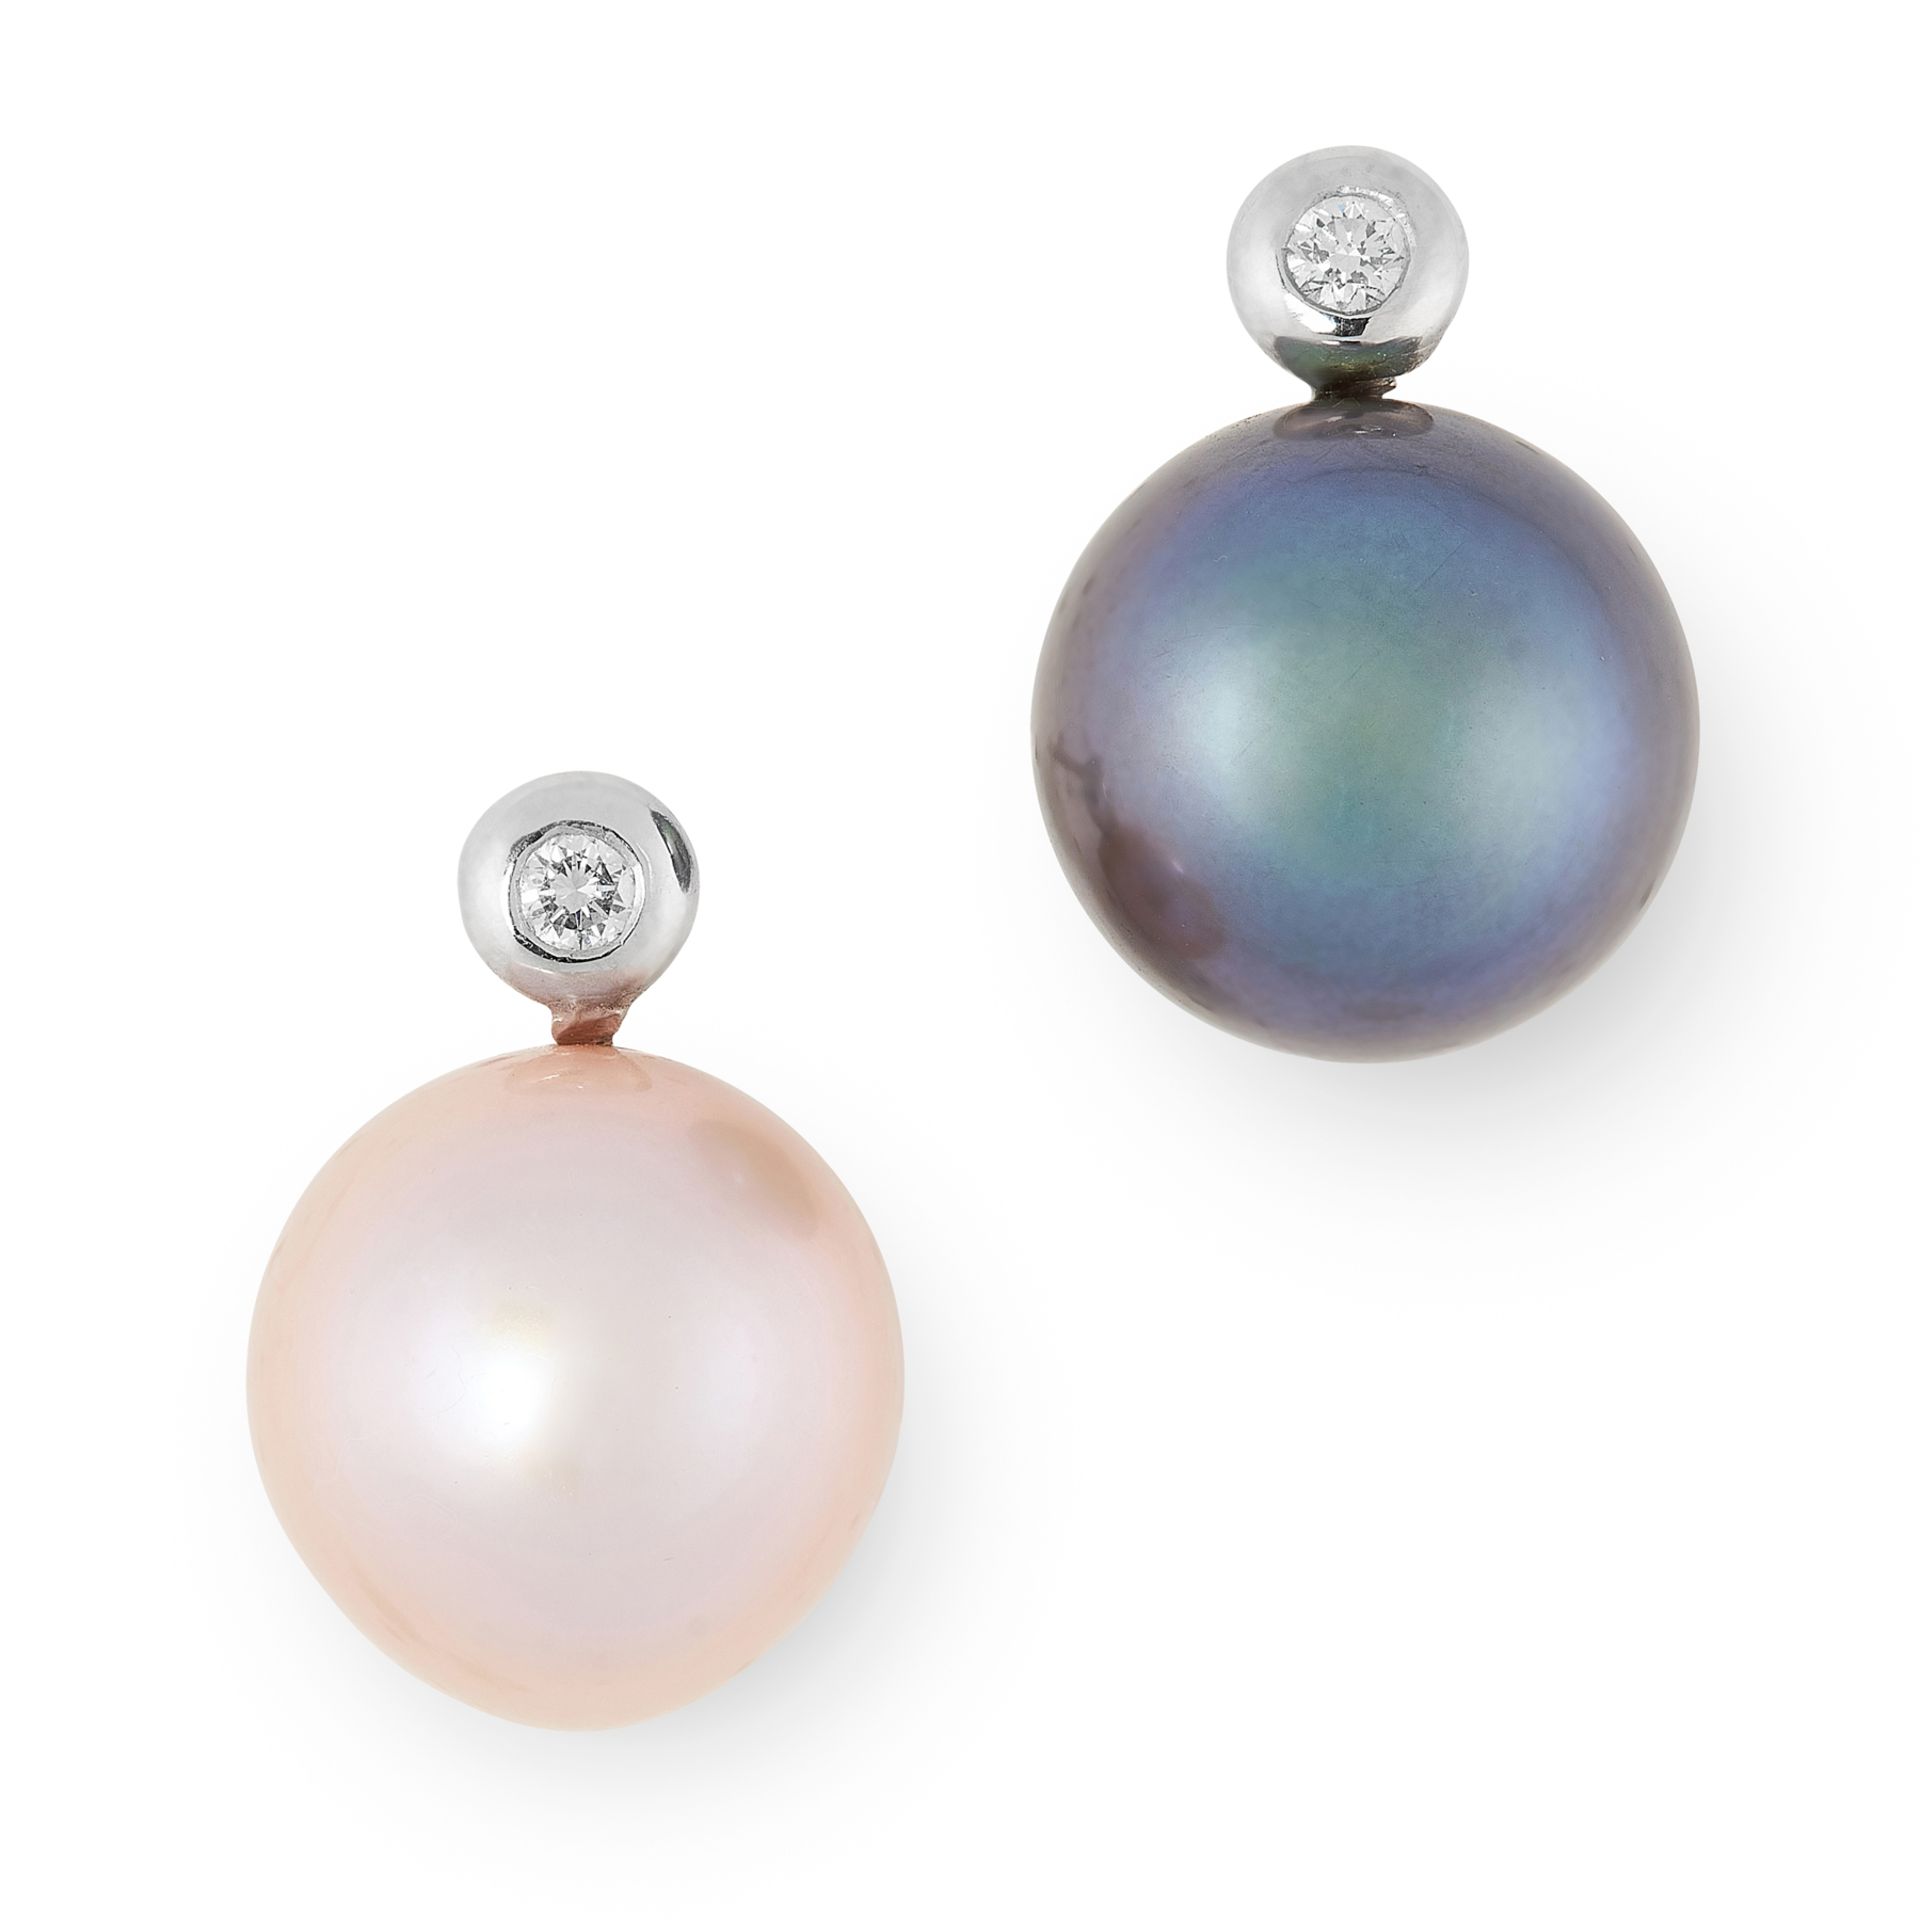 A PAIR OF PINK AND BLACK PEARL AND DIAMOND EARRINGS each set with a pink and black pearl of 15.